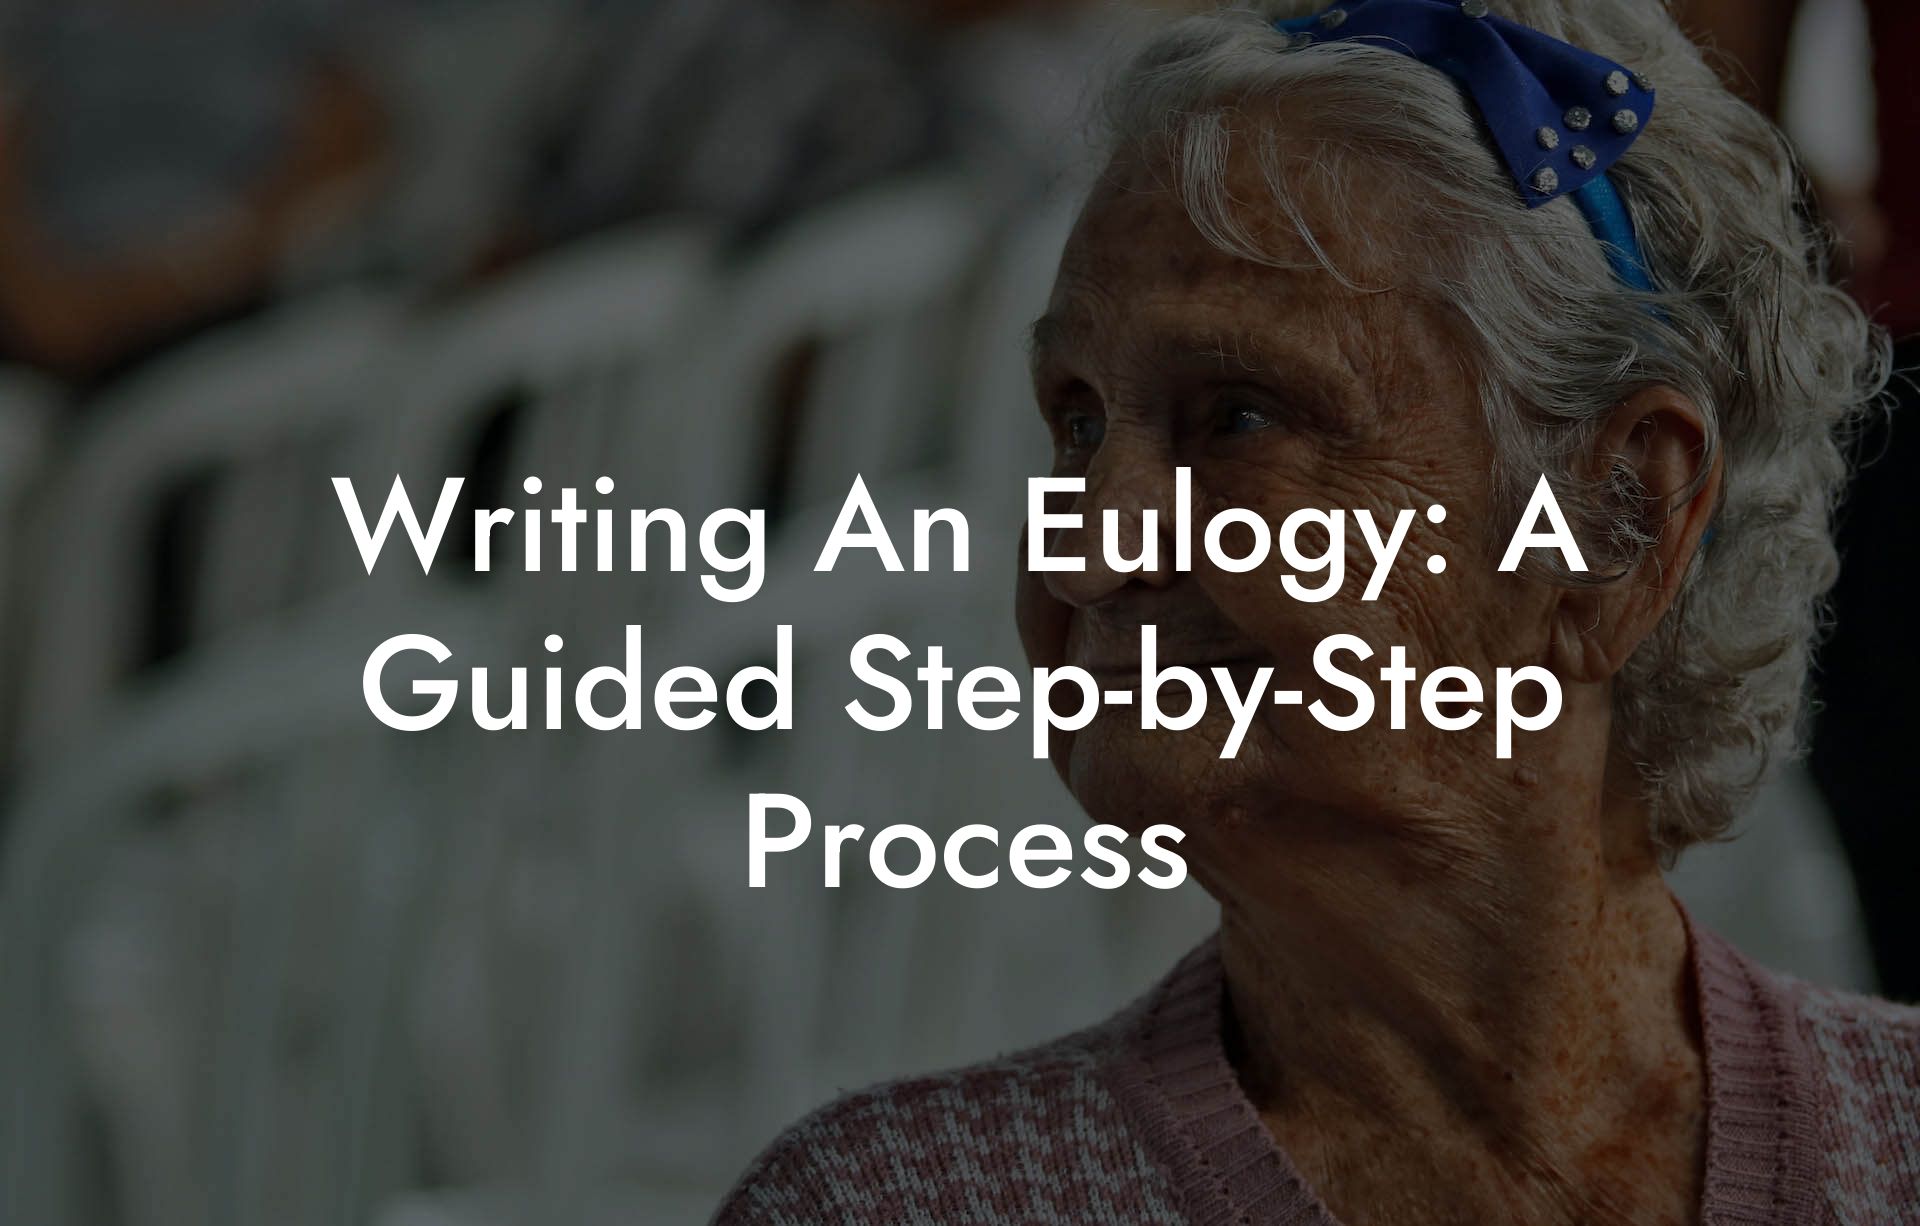 Writing An Eulogy: A Guided Step-by-Step Process